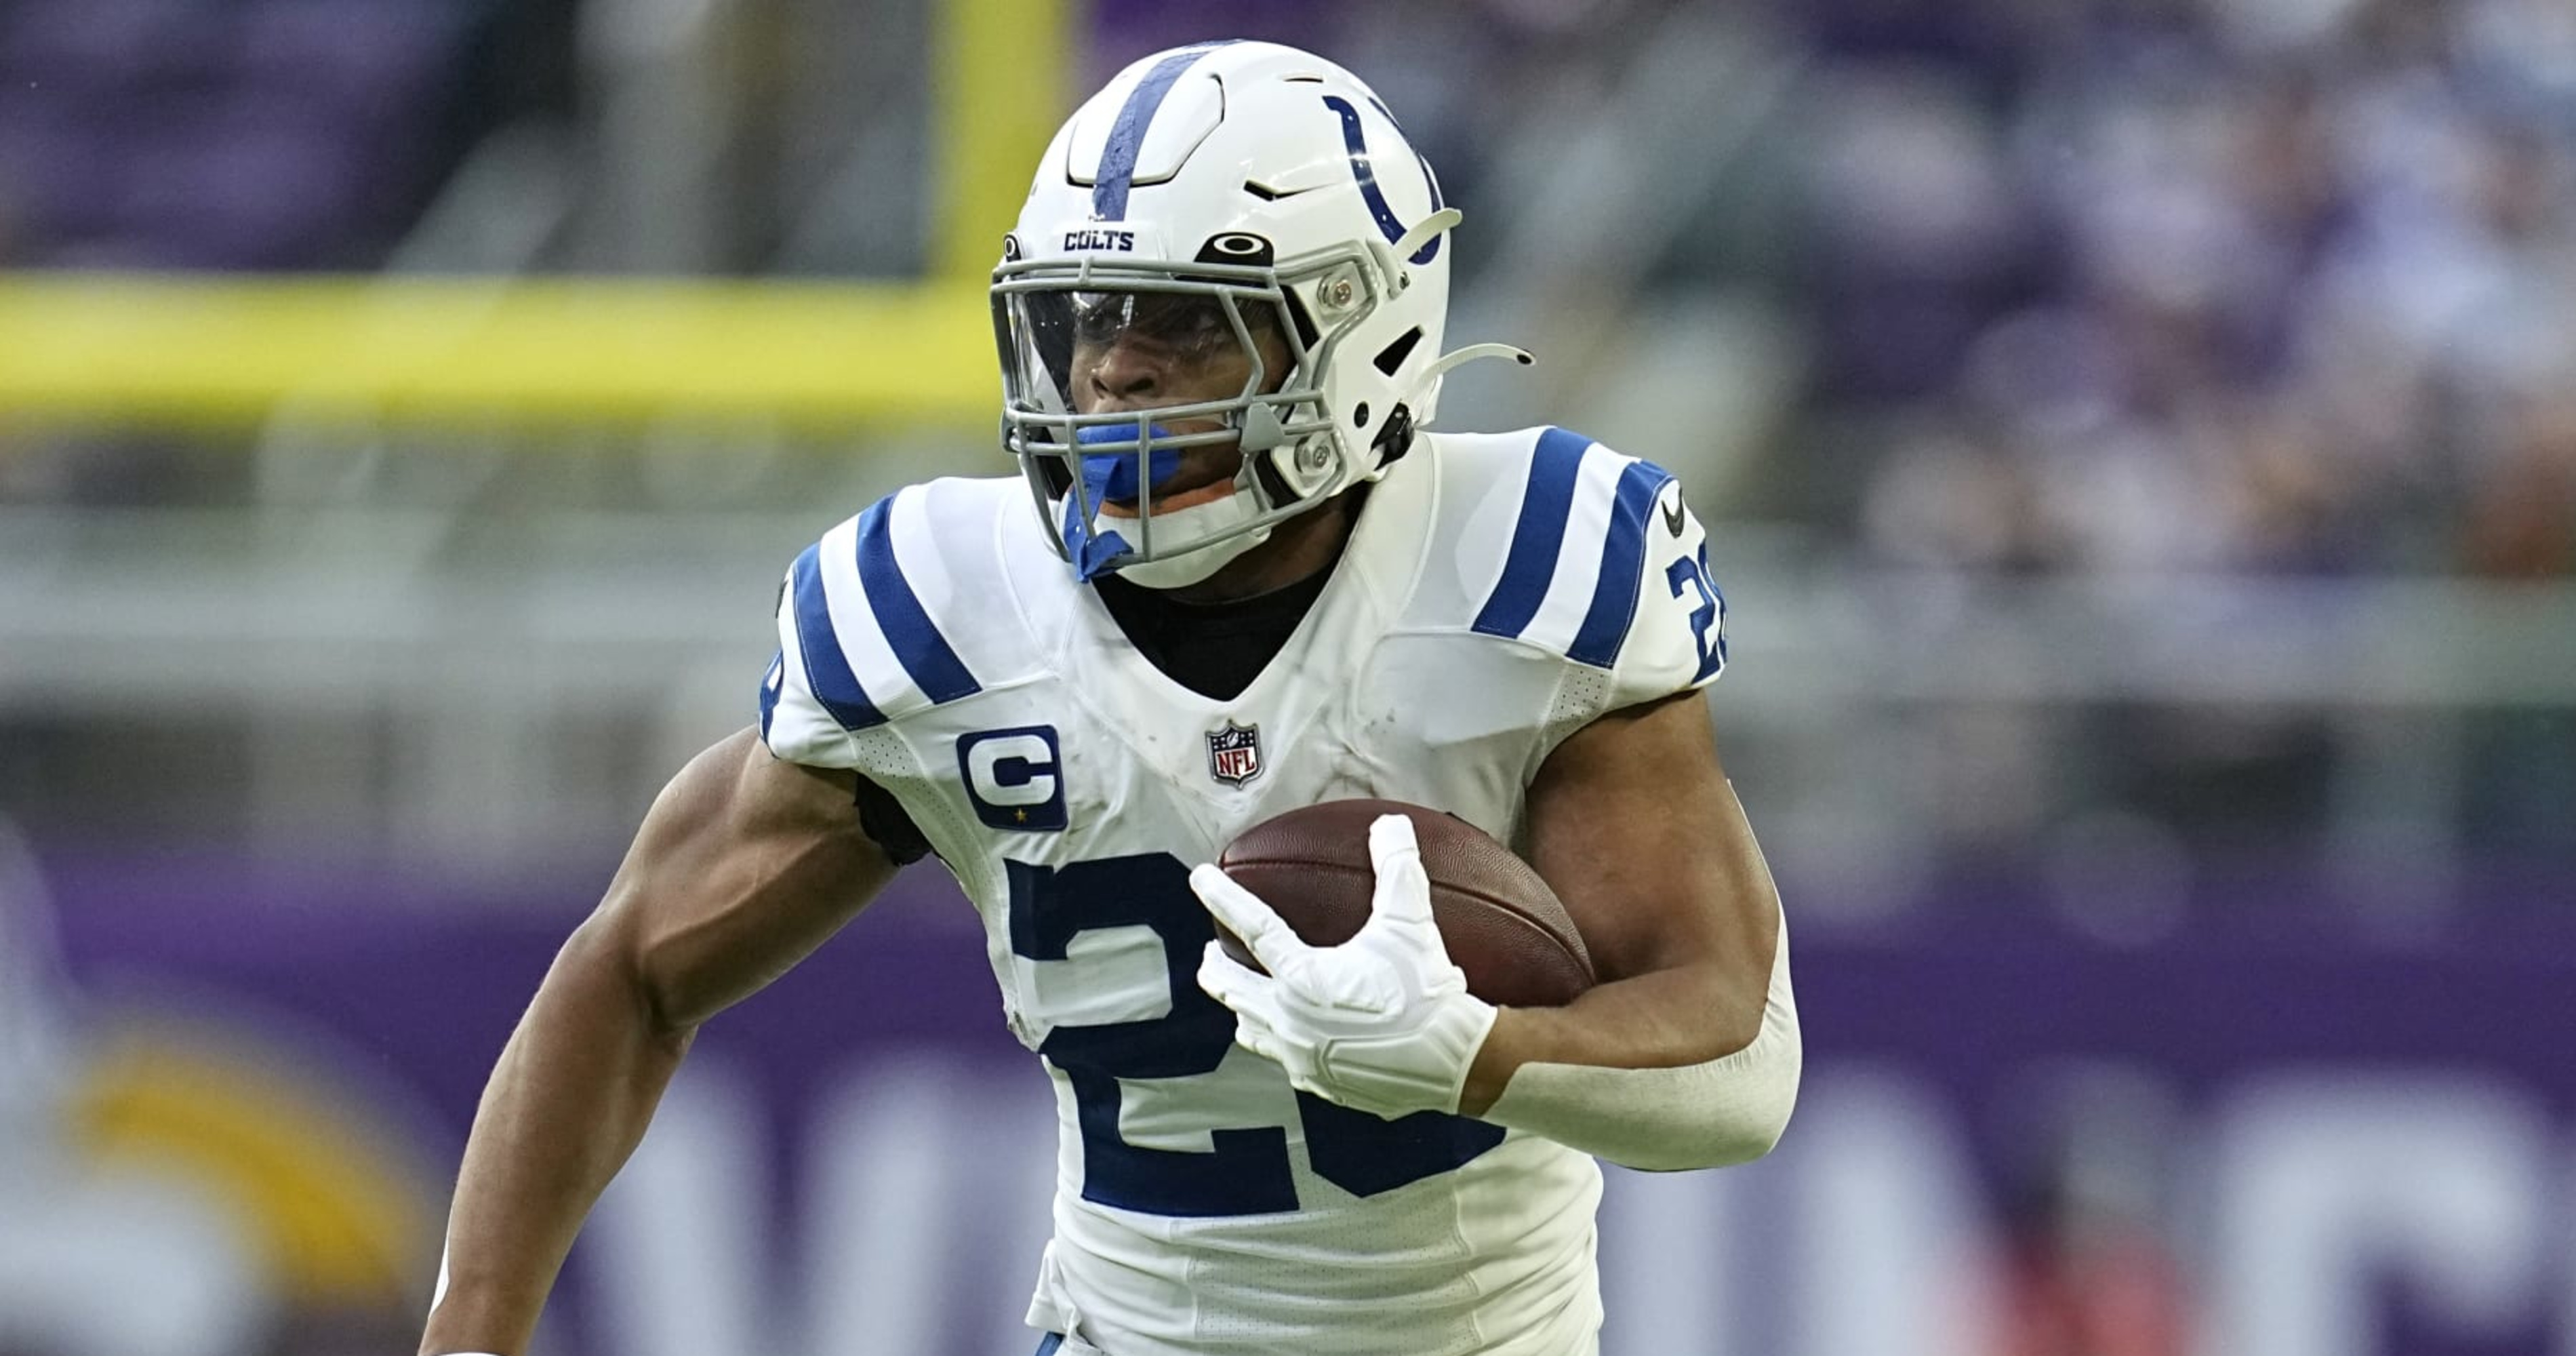 Jonathan Taylor Trade Rumors: Colts Open to Offers Despite Self-Imposed Deadline